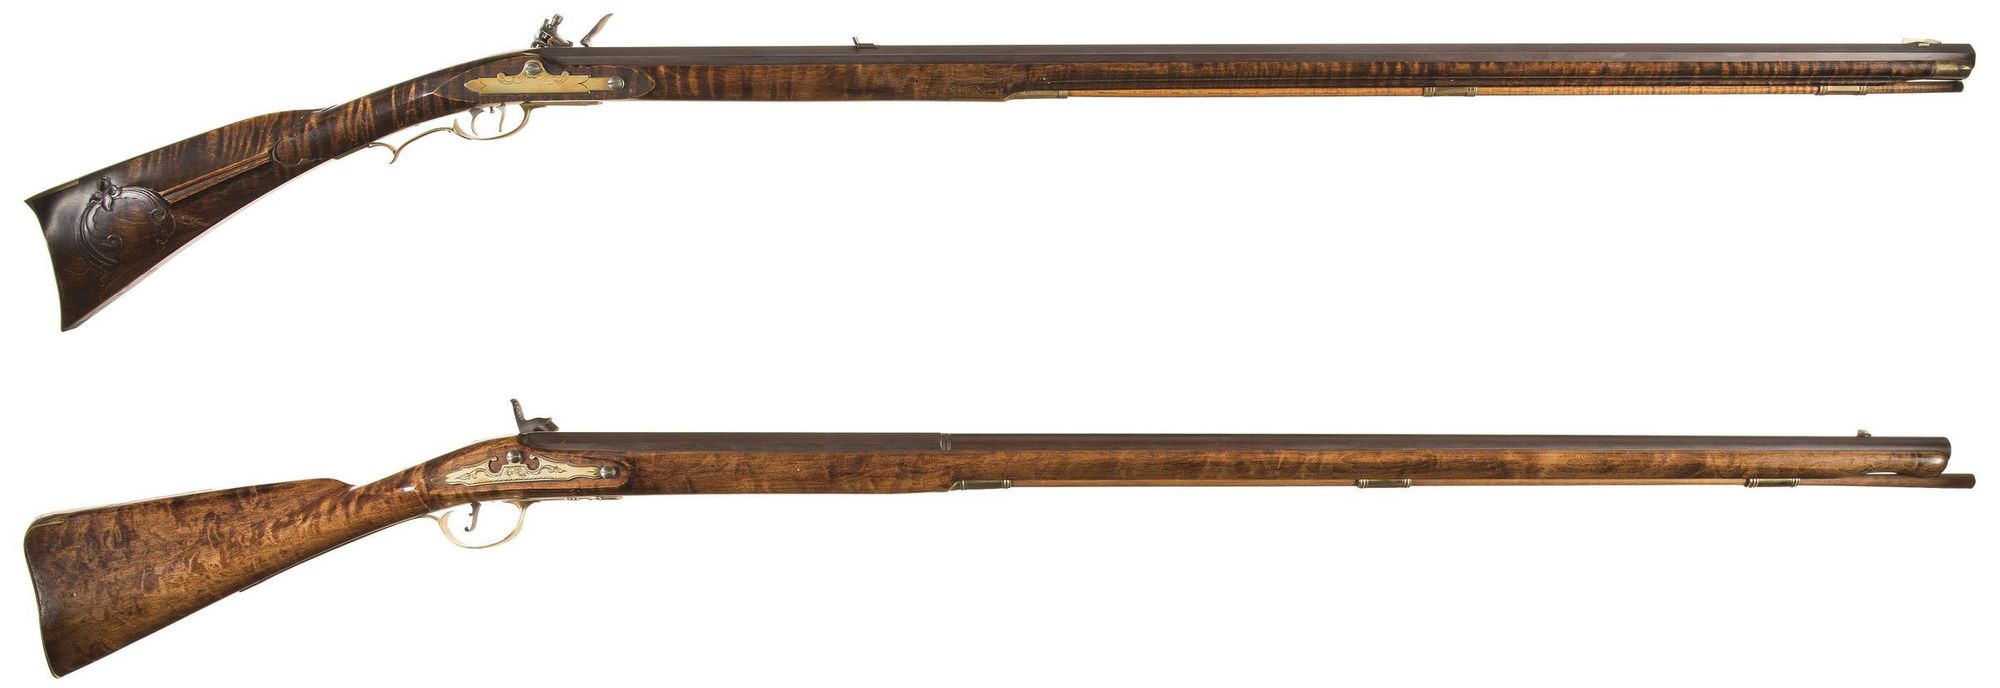 Lot 4205: Two Engraved Contemporary Left handed Muzzleloading Long Guns